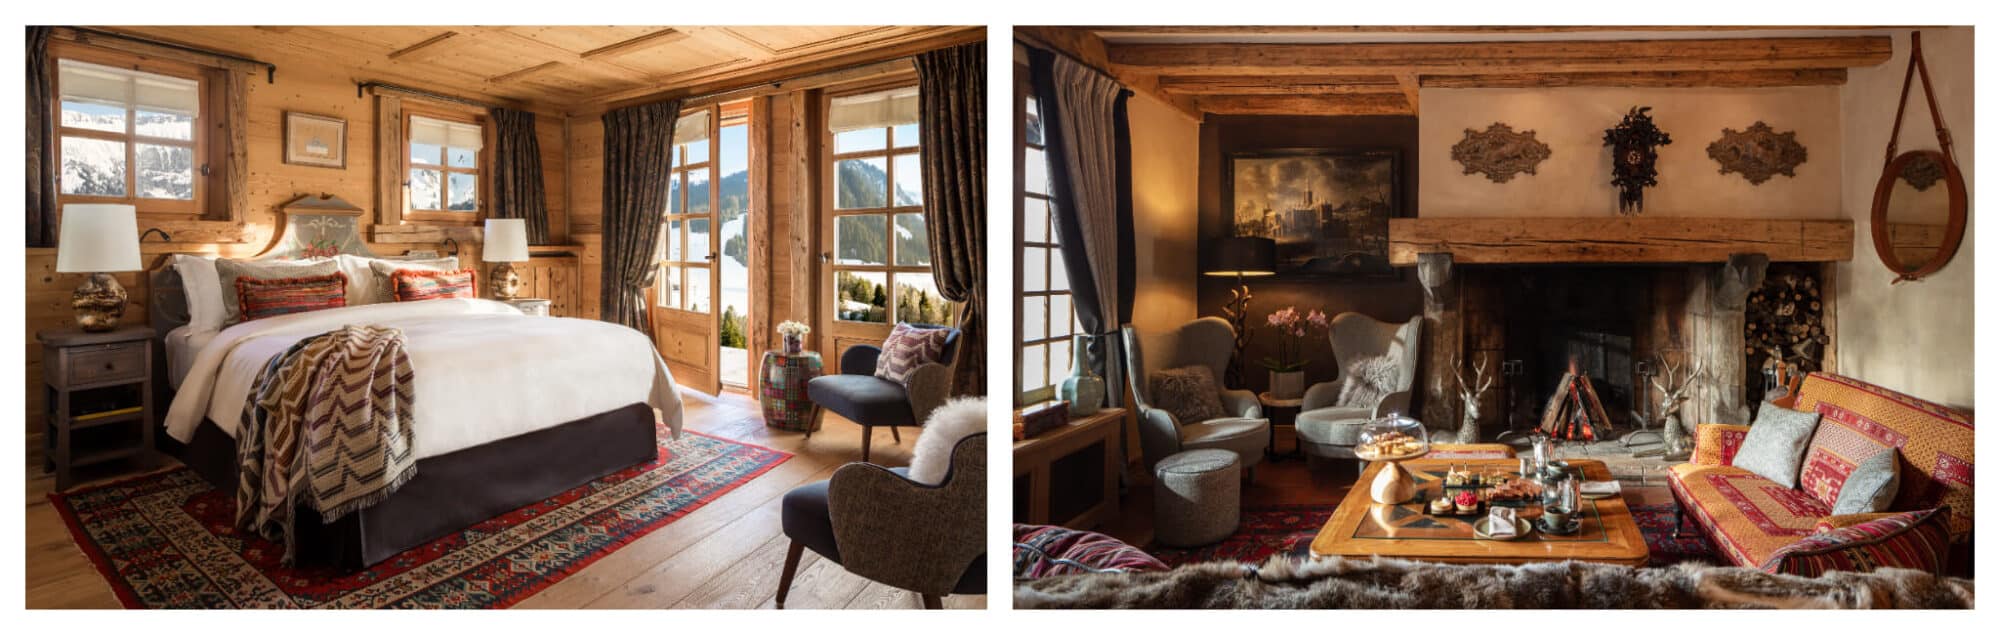 Left: The interior of Les Chalets du Mont d'Arbois - Four Season's Hotel decorated with wooden walls, a white bed, and red carpet. Right: A living room inside the hotel with a cozy fireplace and a beige sofa.